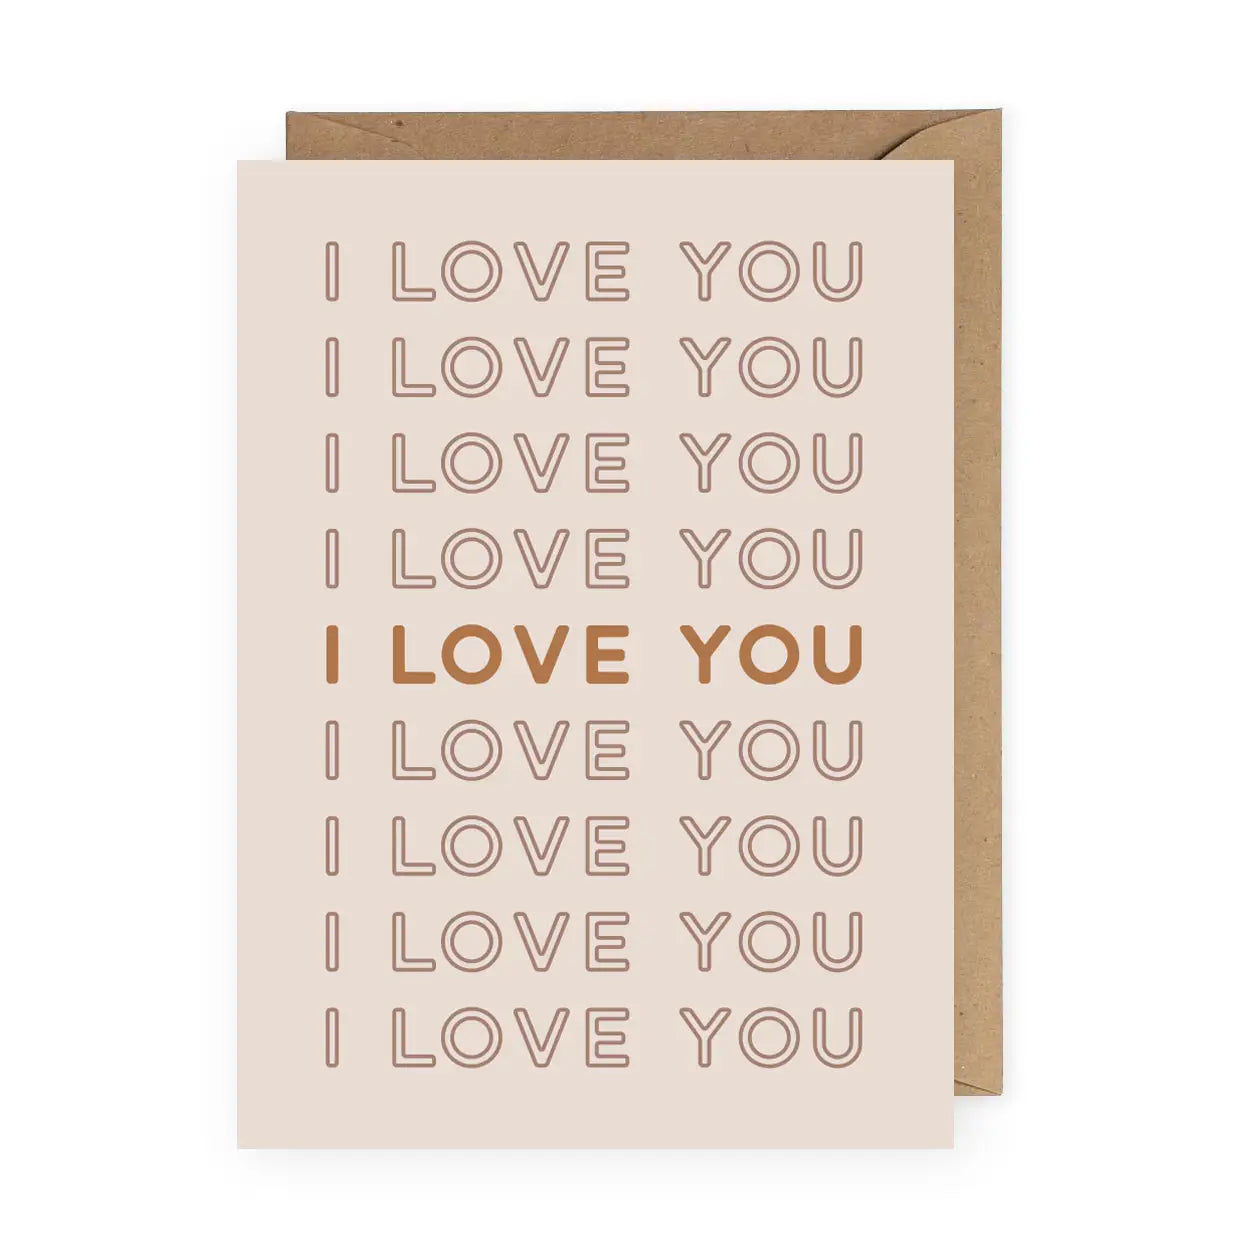 The I Love You Greeting Card